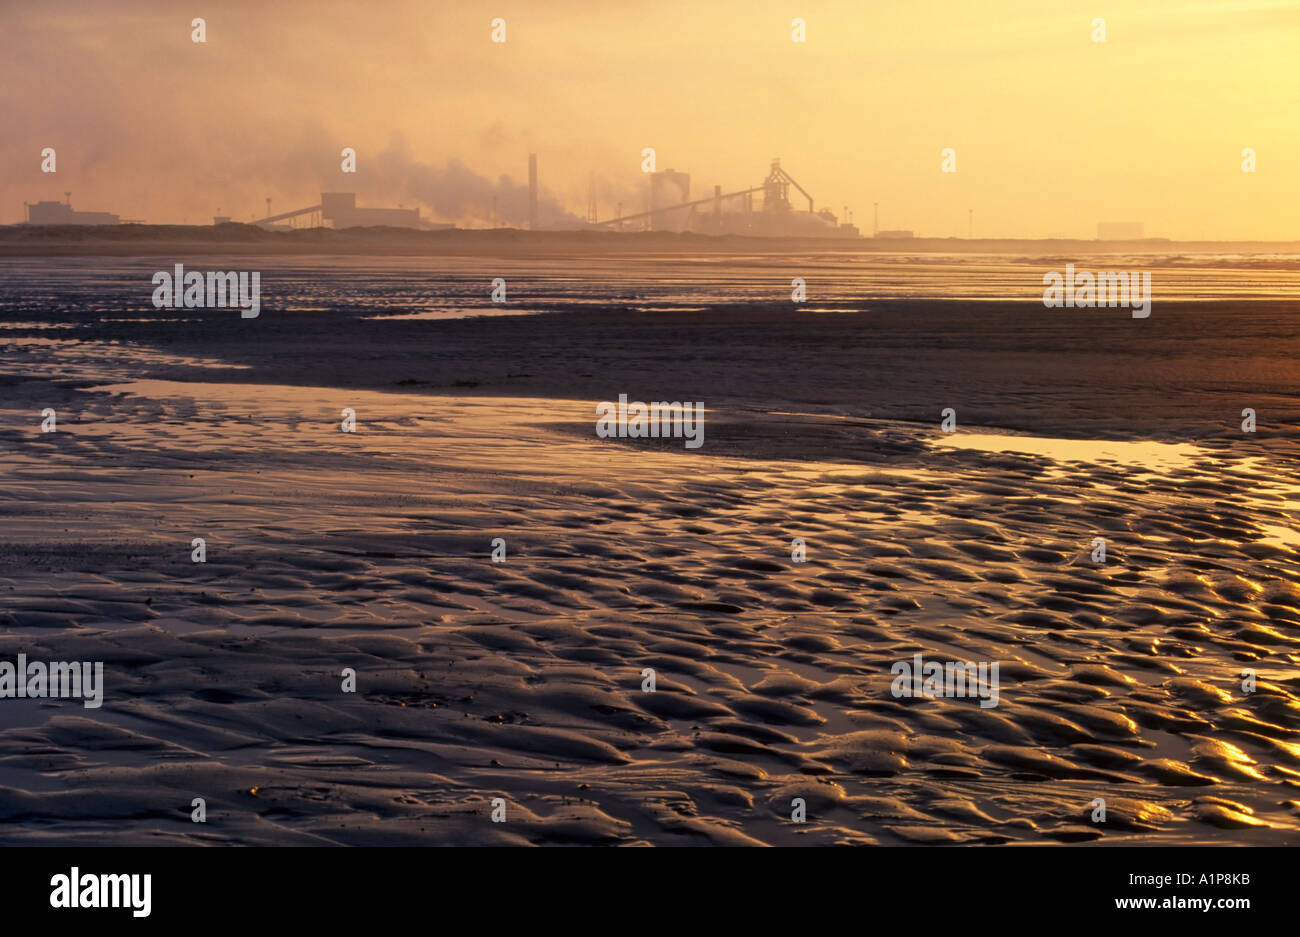 Teesside steelworks at sunset, Redcar, Cleveland, England Stock Photo